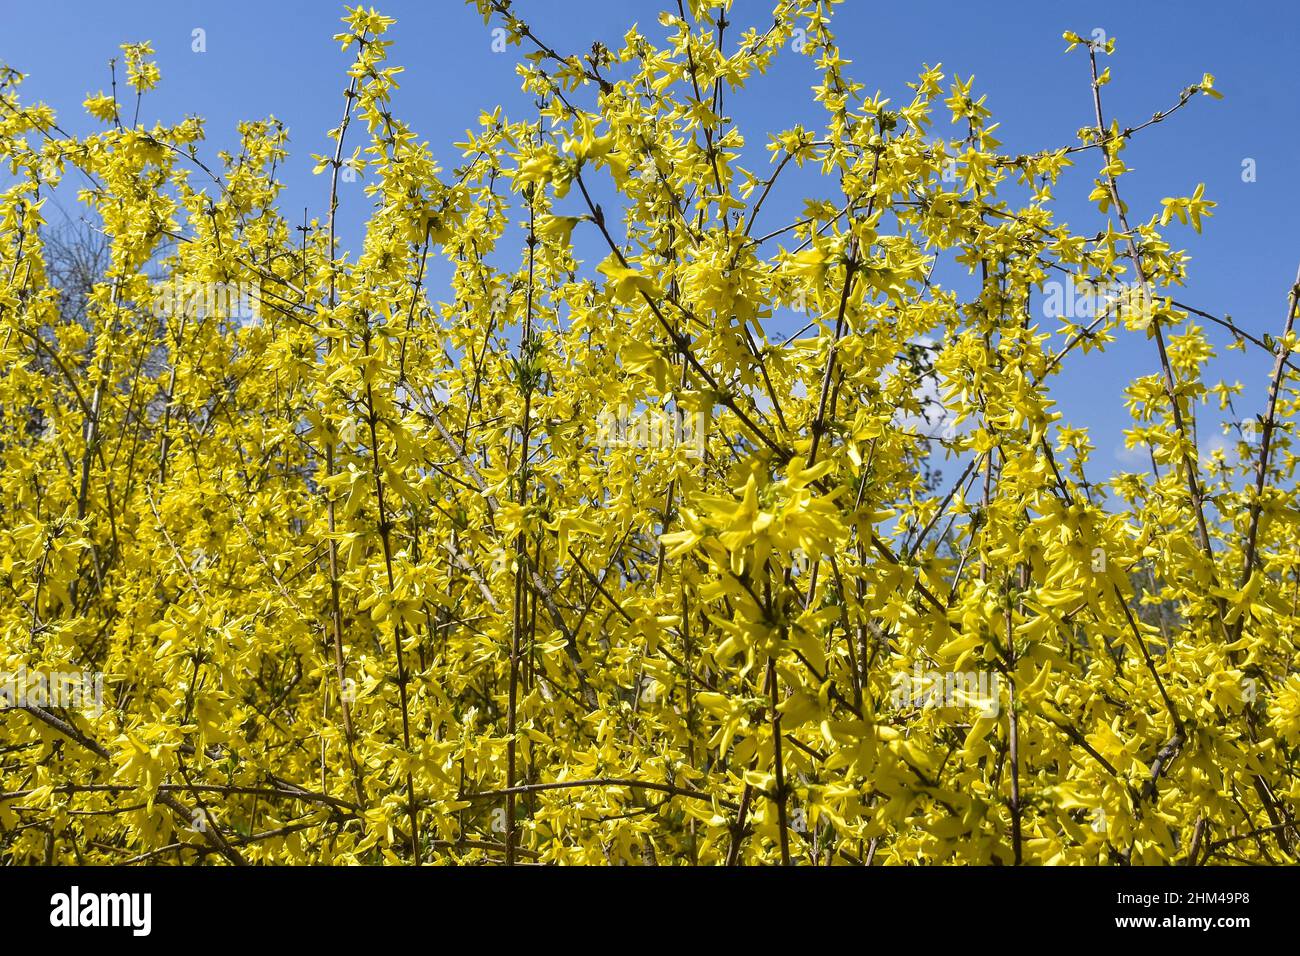 Bright yellow flowering of Forsythia against blue sky with clouds. Shrub from family of Olives (Oleaceae). Most forsythia species originate from China Stock Photo